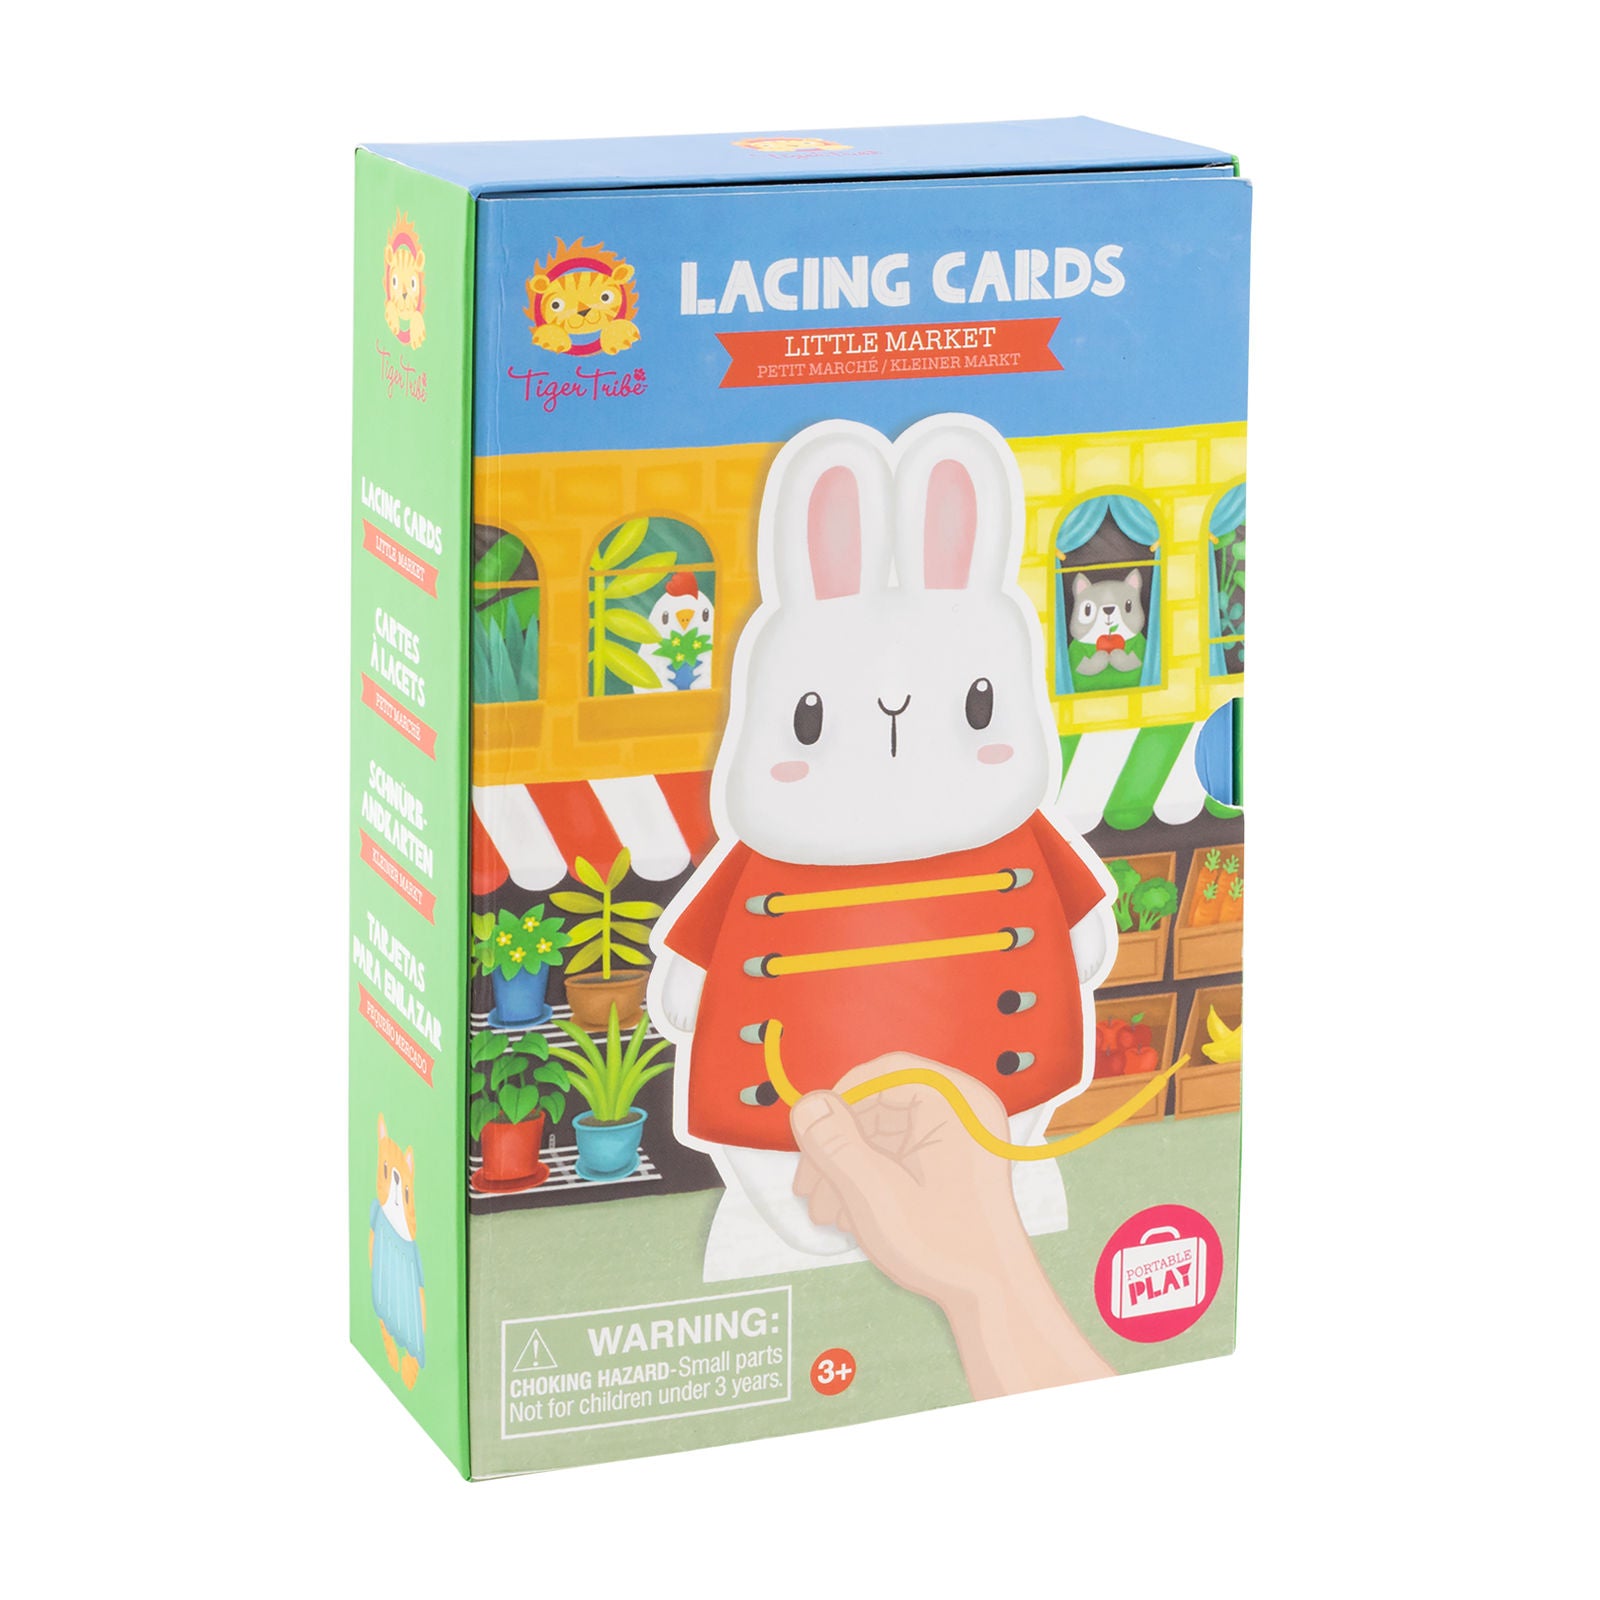 Tiger Tribe Lacing Cards – Little Market